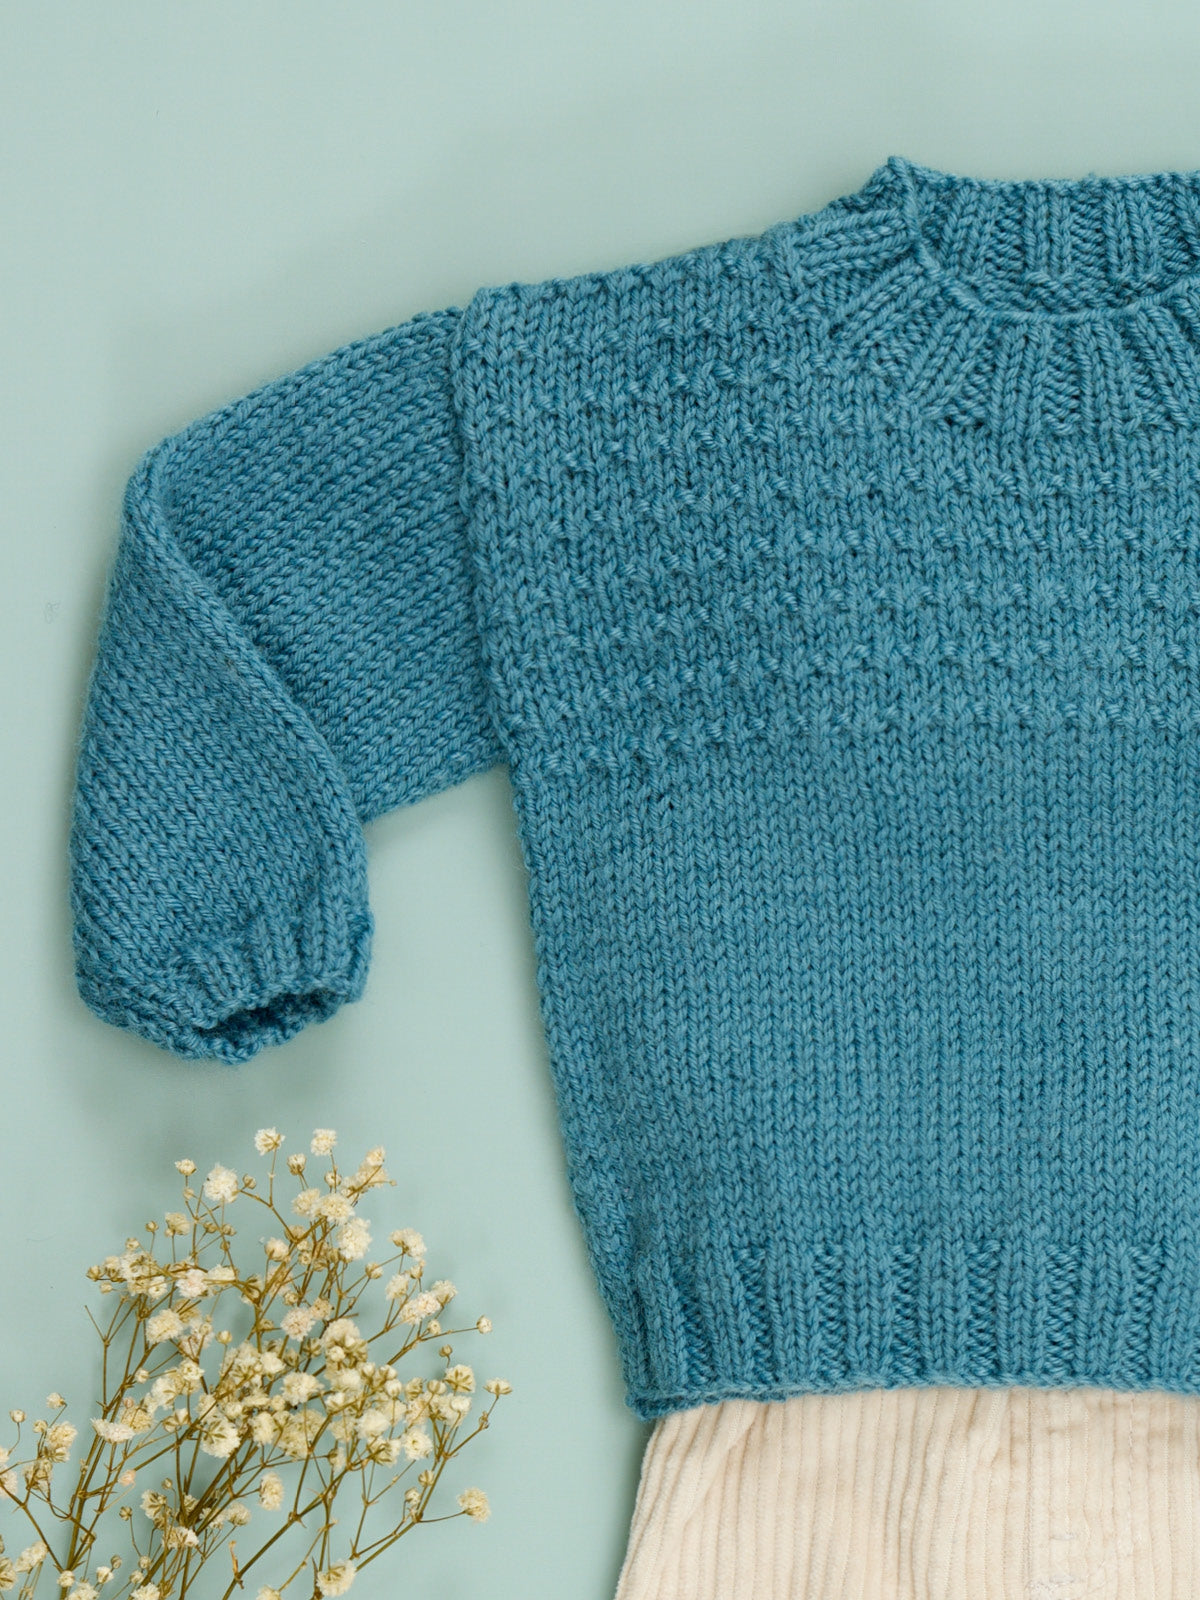 WYS Jack: Textured Jumpers in Bo Peep DK by Sarah Hatton